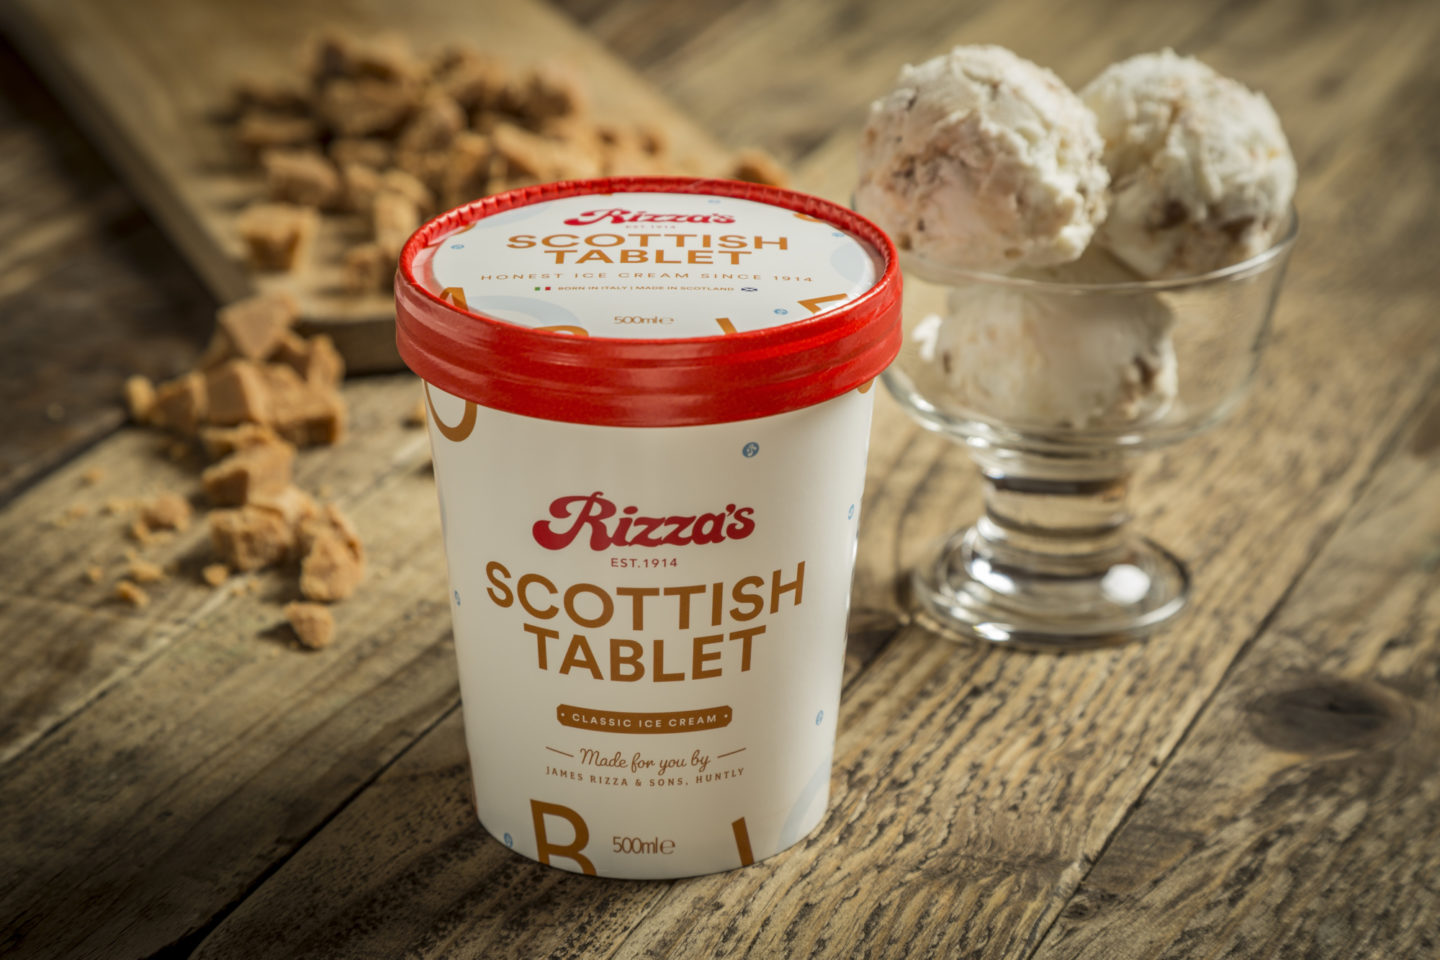 New Ice Cream Packaging and Brand Refresh Created by FortyTwo Studio for Family Owned James Rizza & Sons